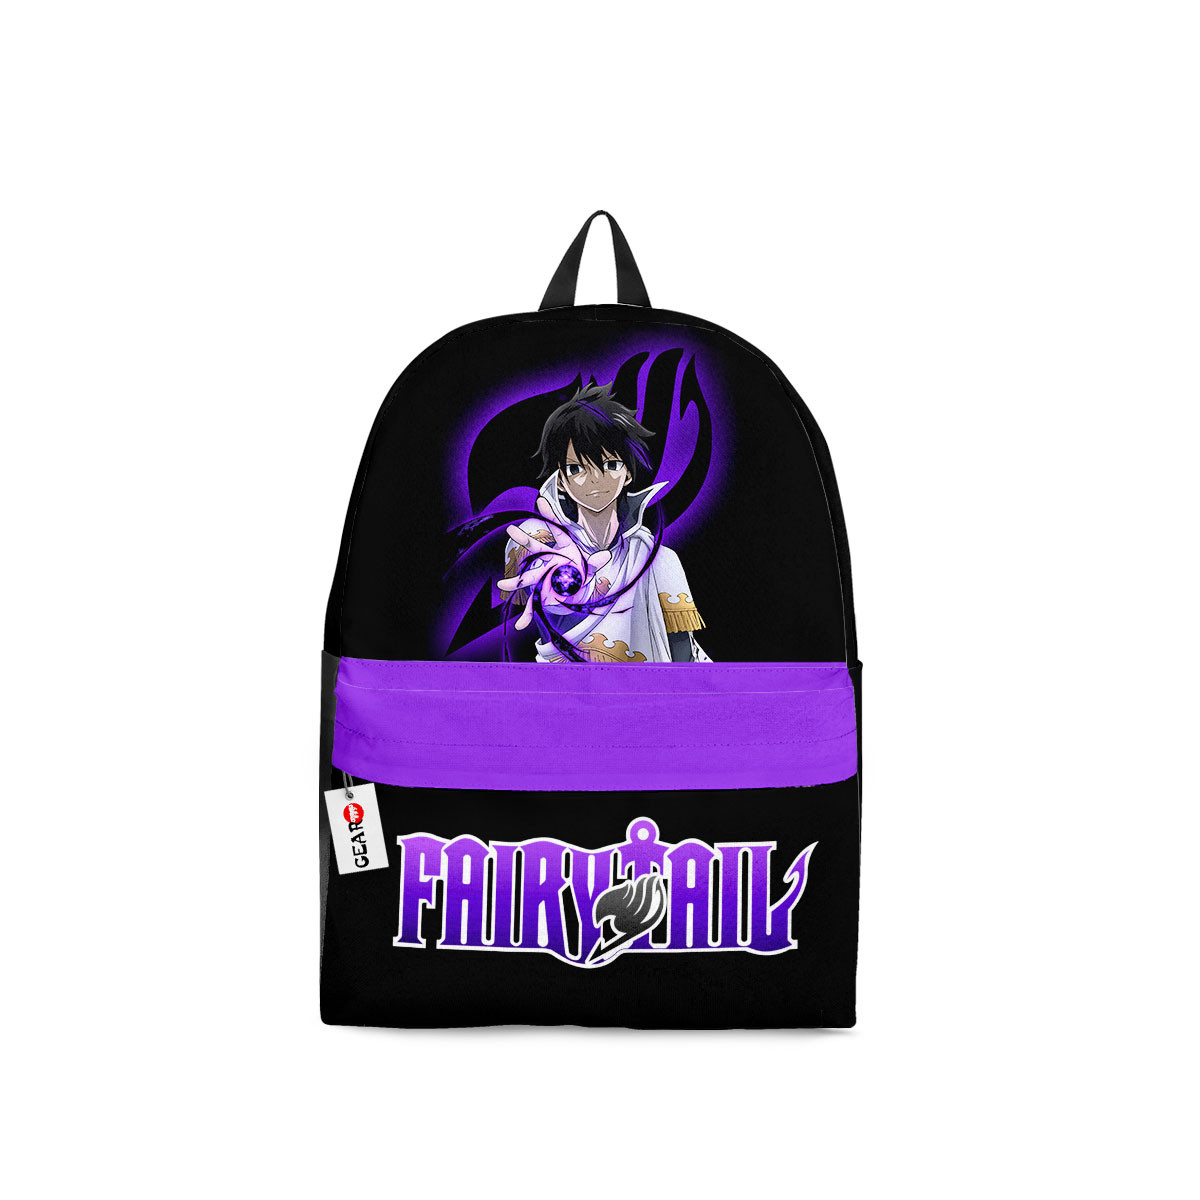 BEST Zeref Fairy Tail Anime Backpack Bag1